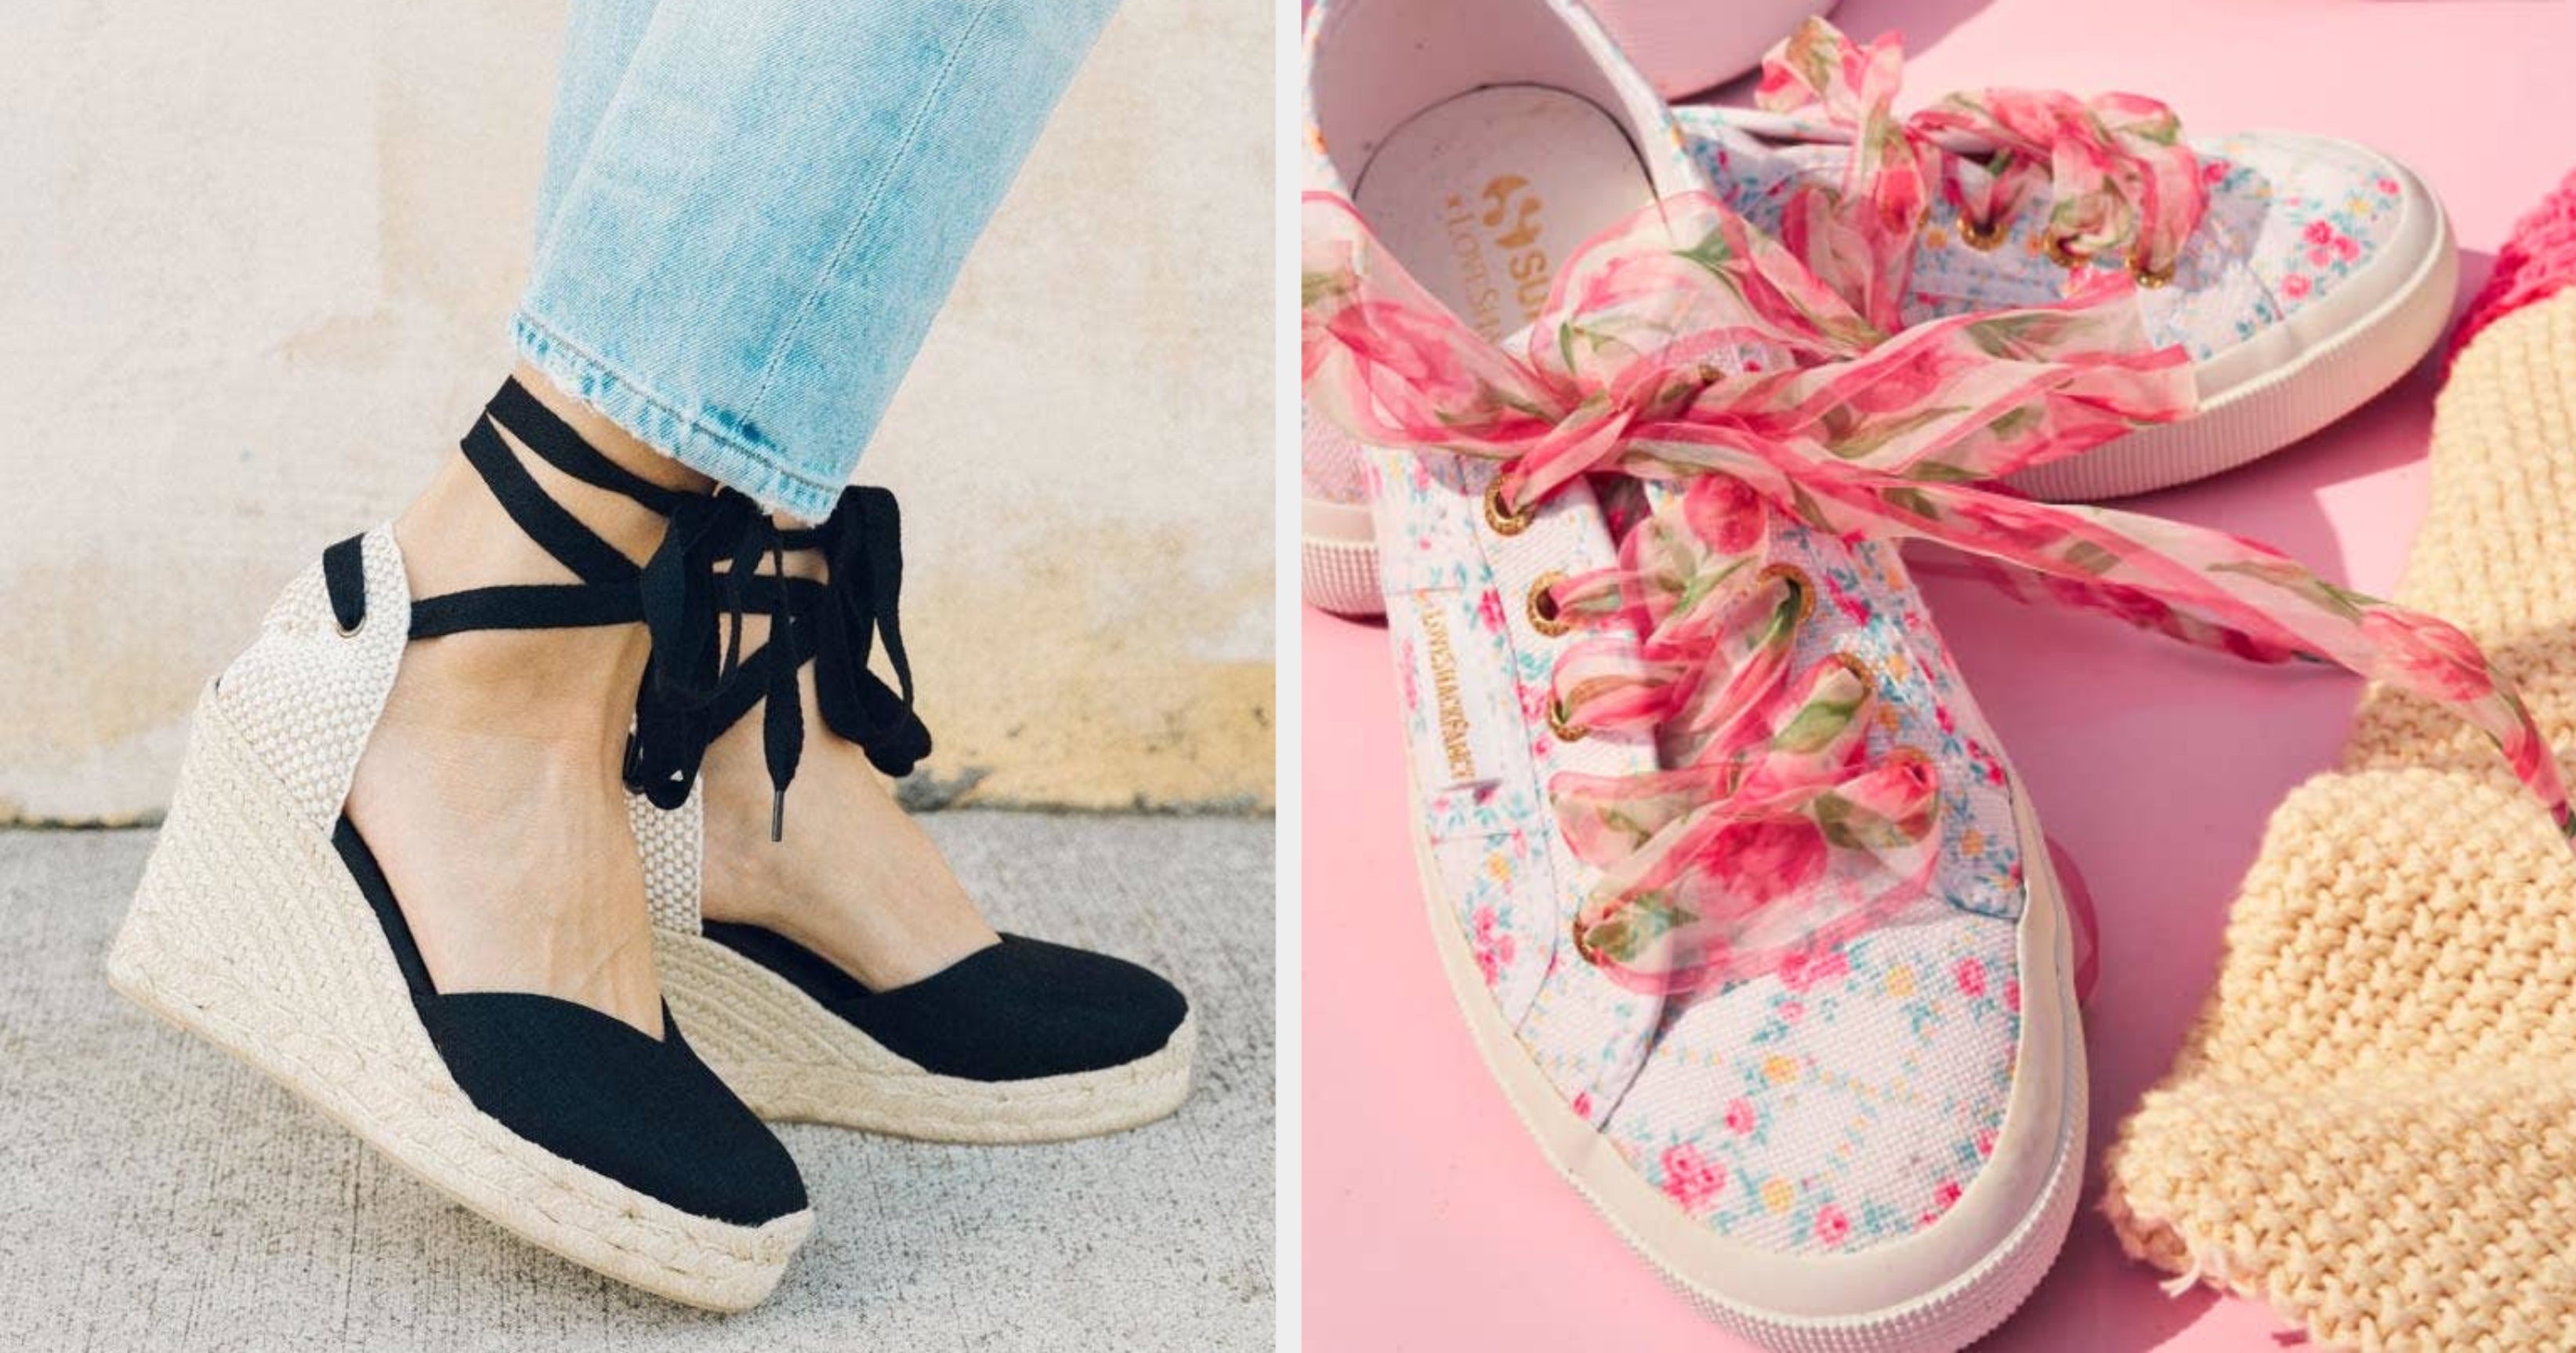 26 Pairs Of Shoes So Comfortable You May Be Tempted To Cry Tears Of Joy